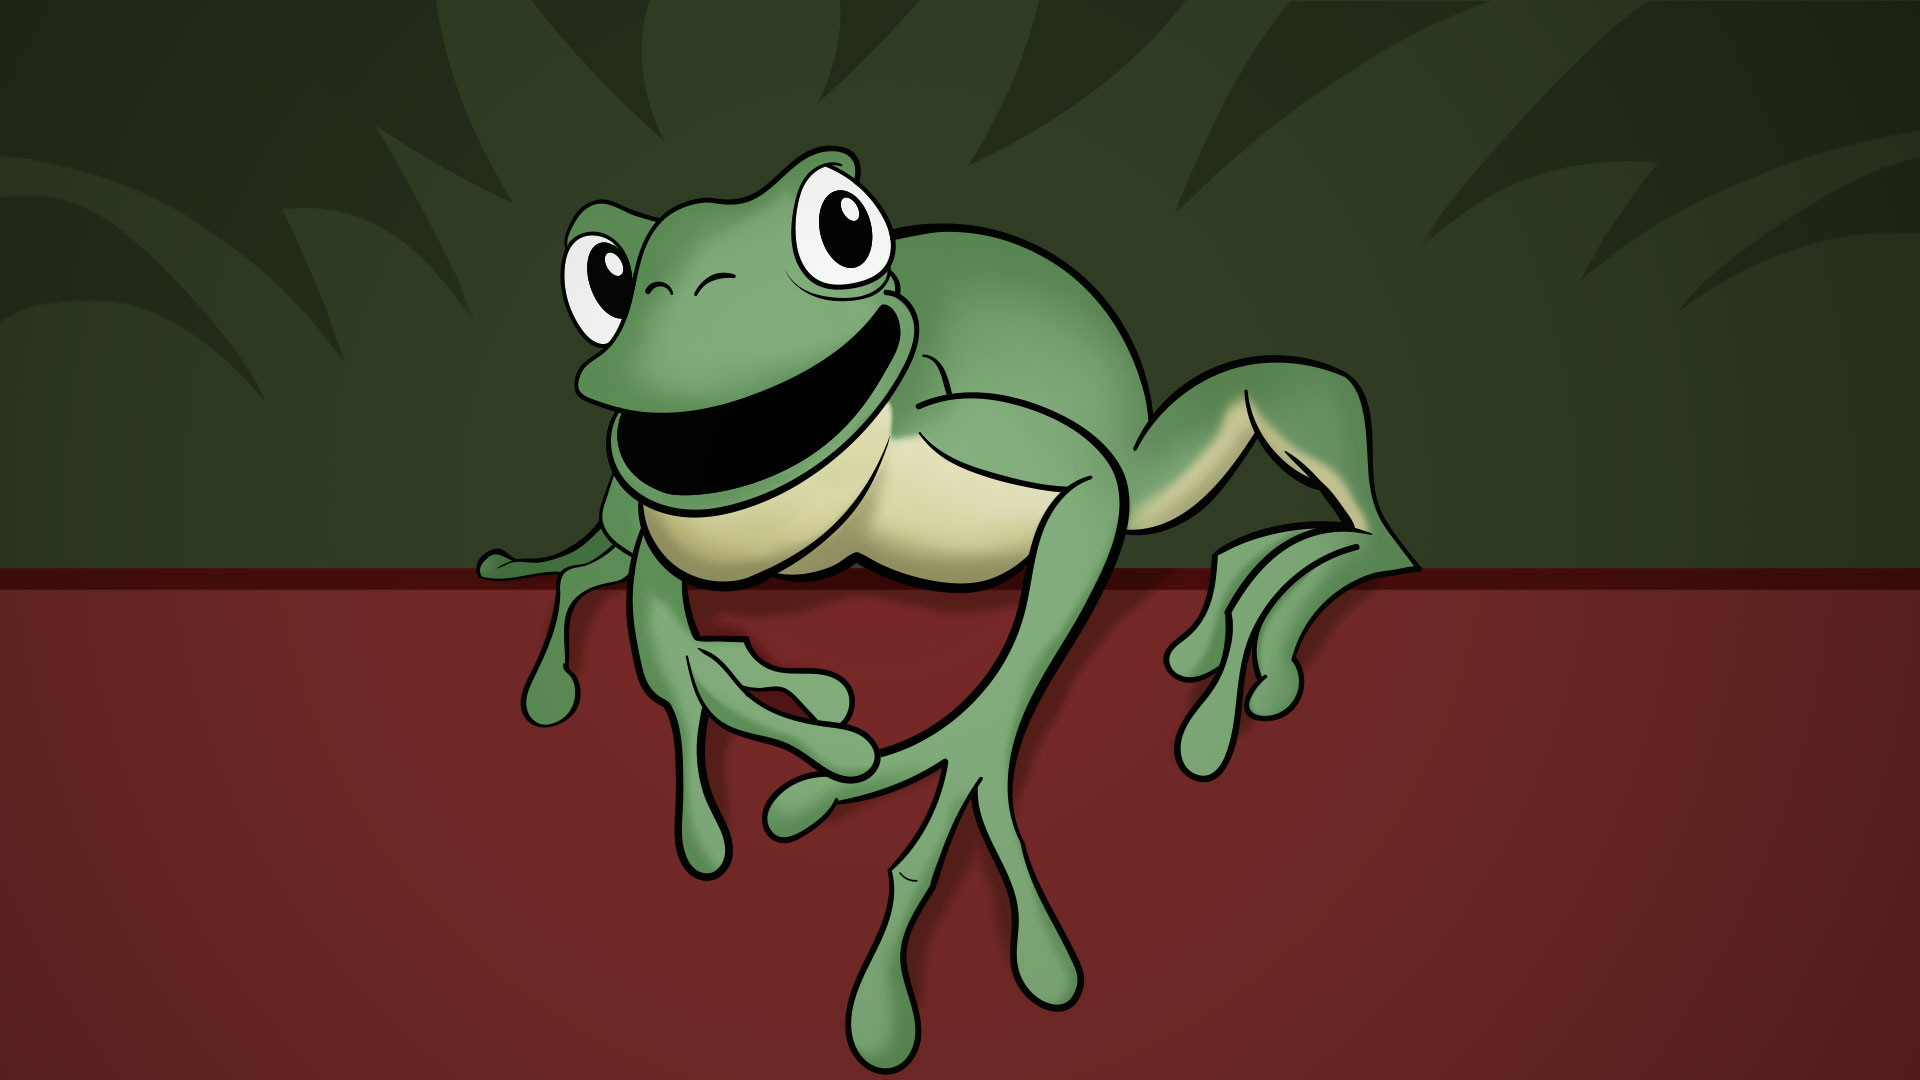 Digital painting of a frog